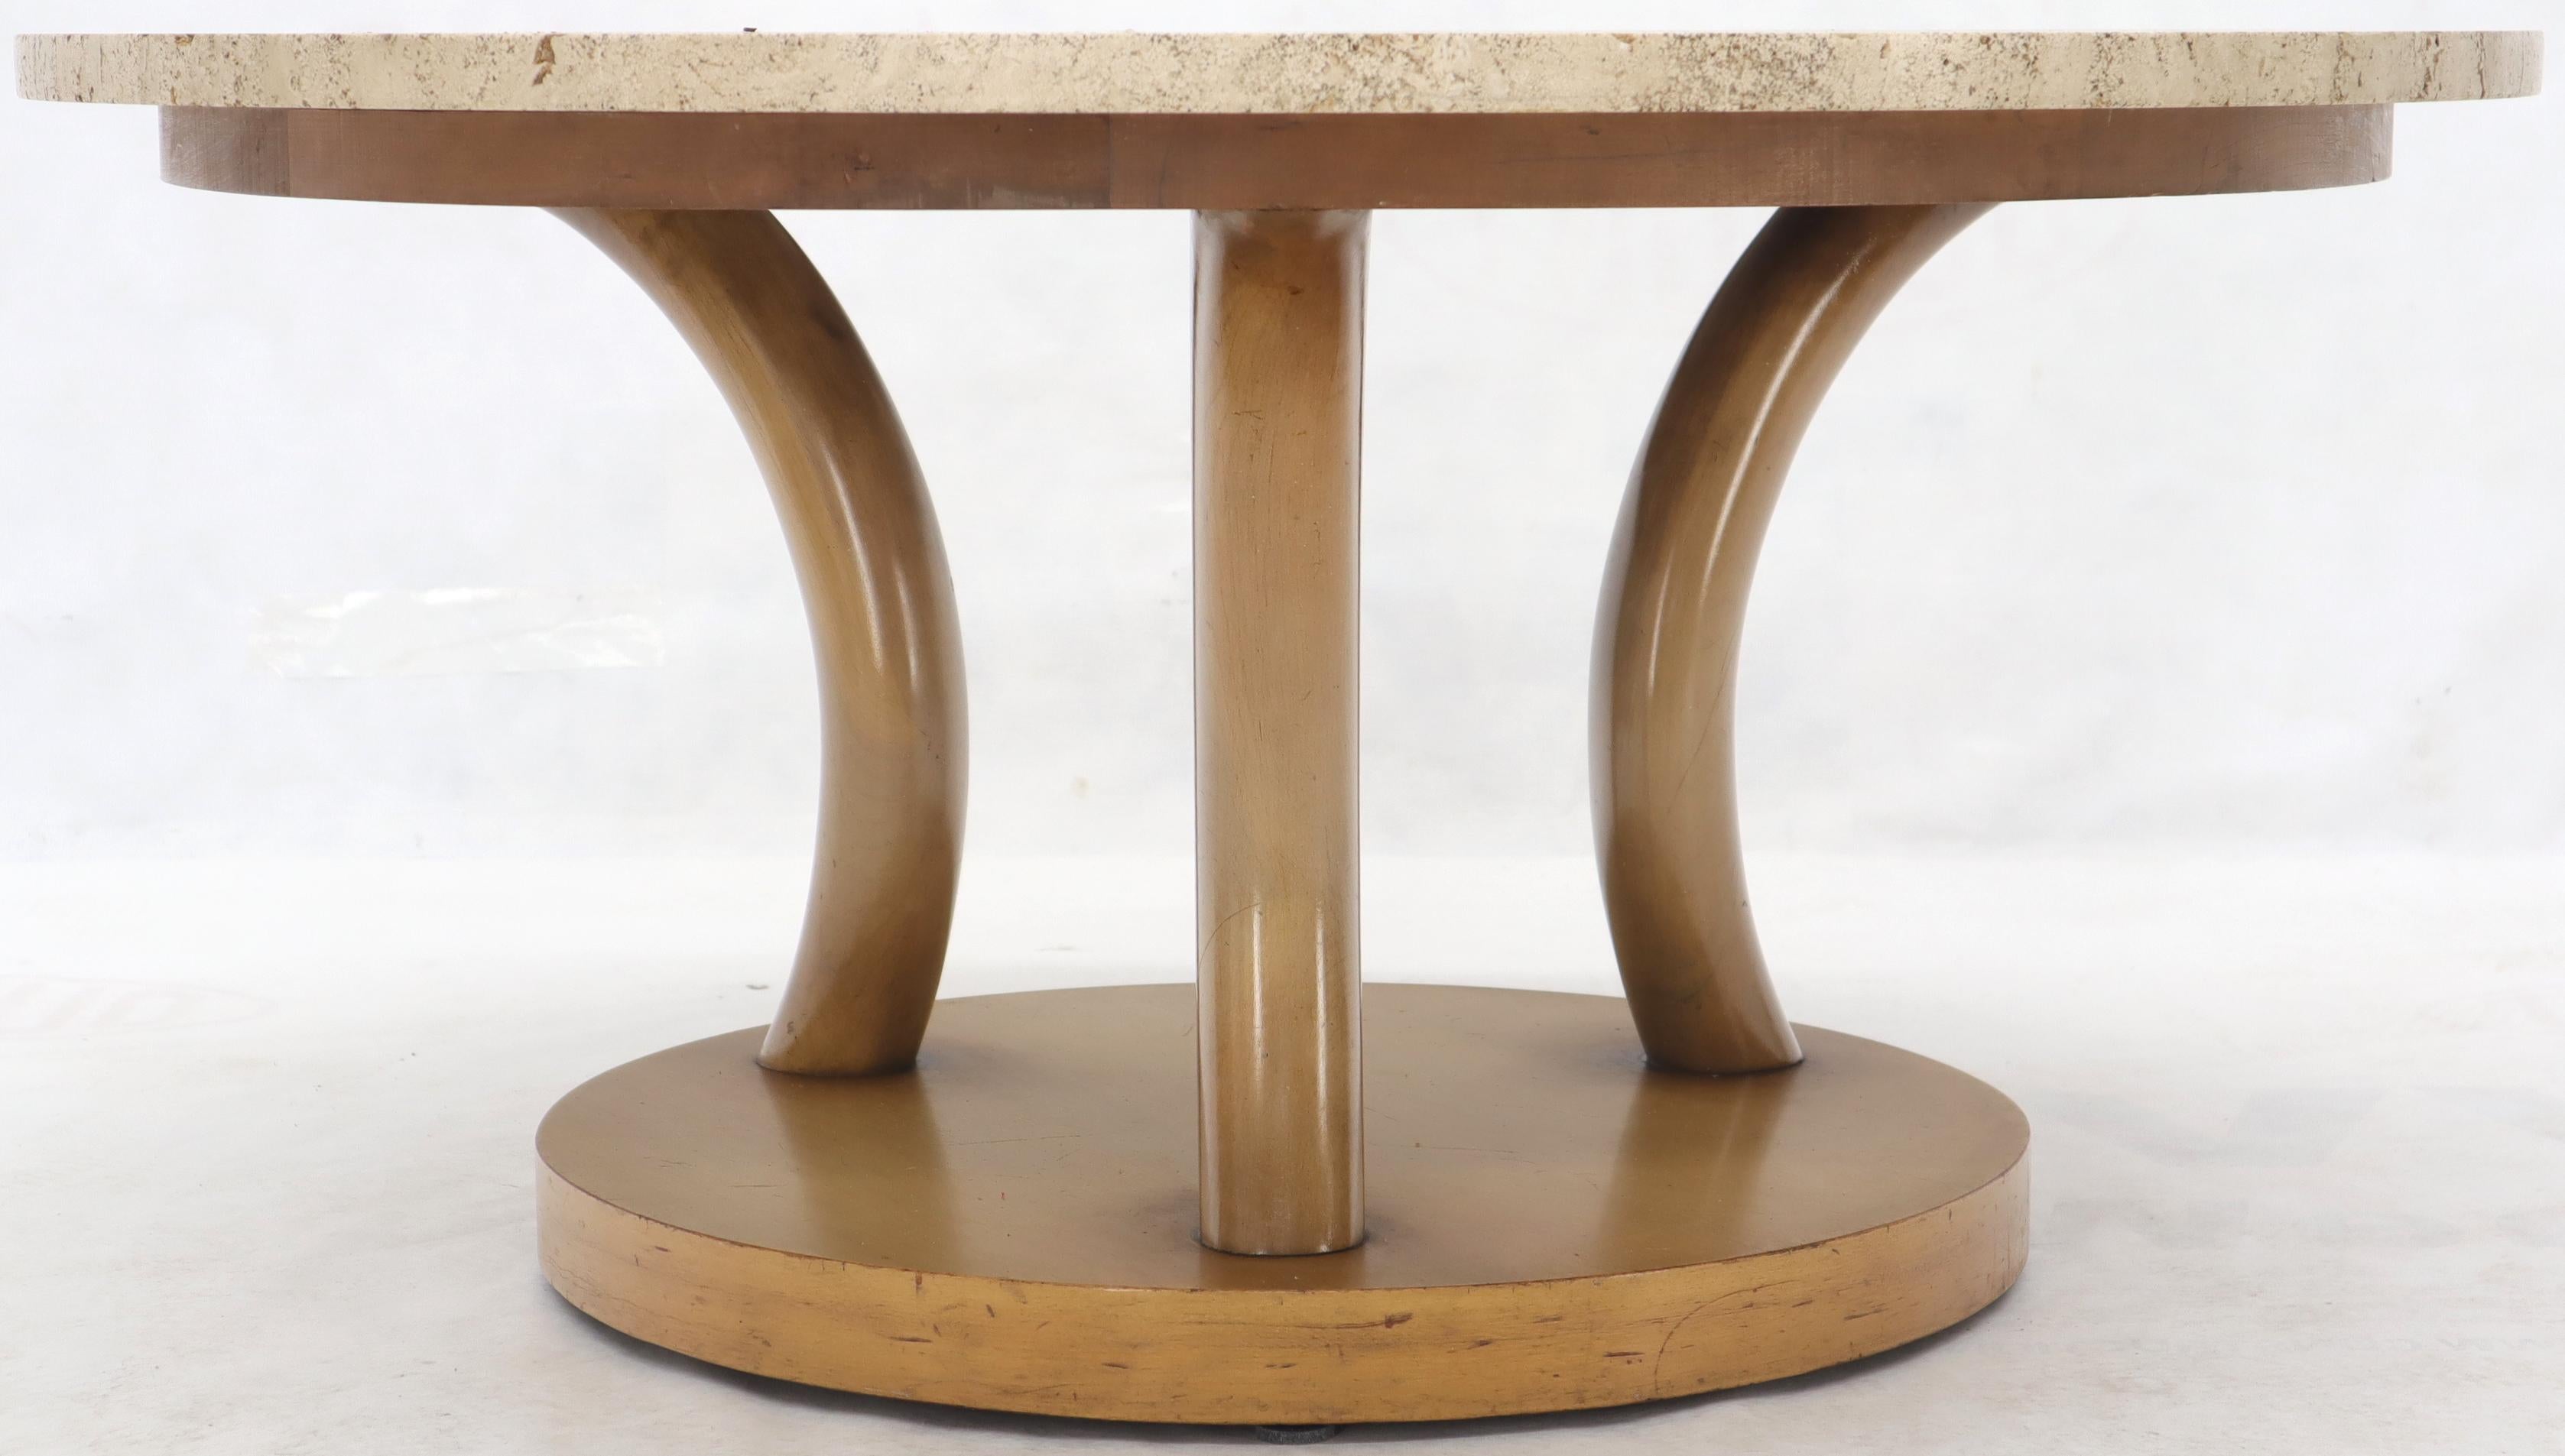 Lacquered travertine Top Horn Like Pillars Tripod Base Round Coffee Table For Sale